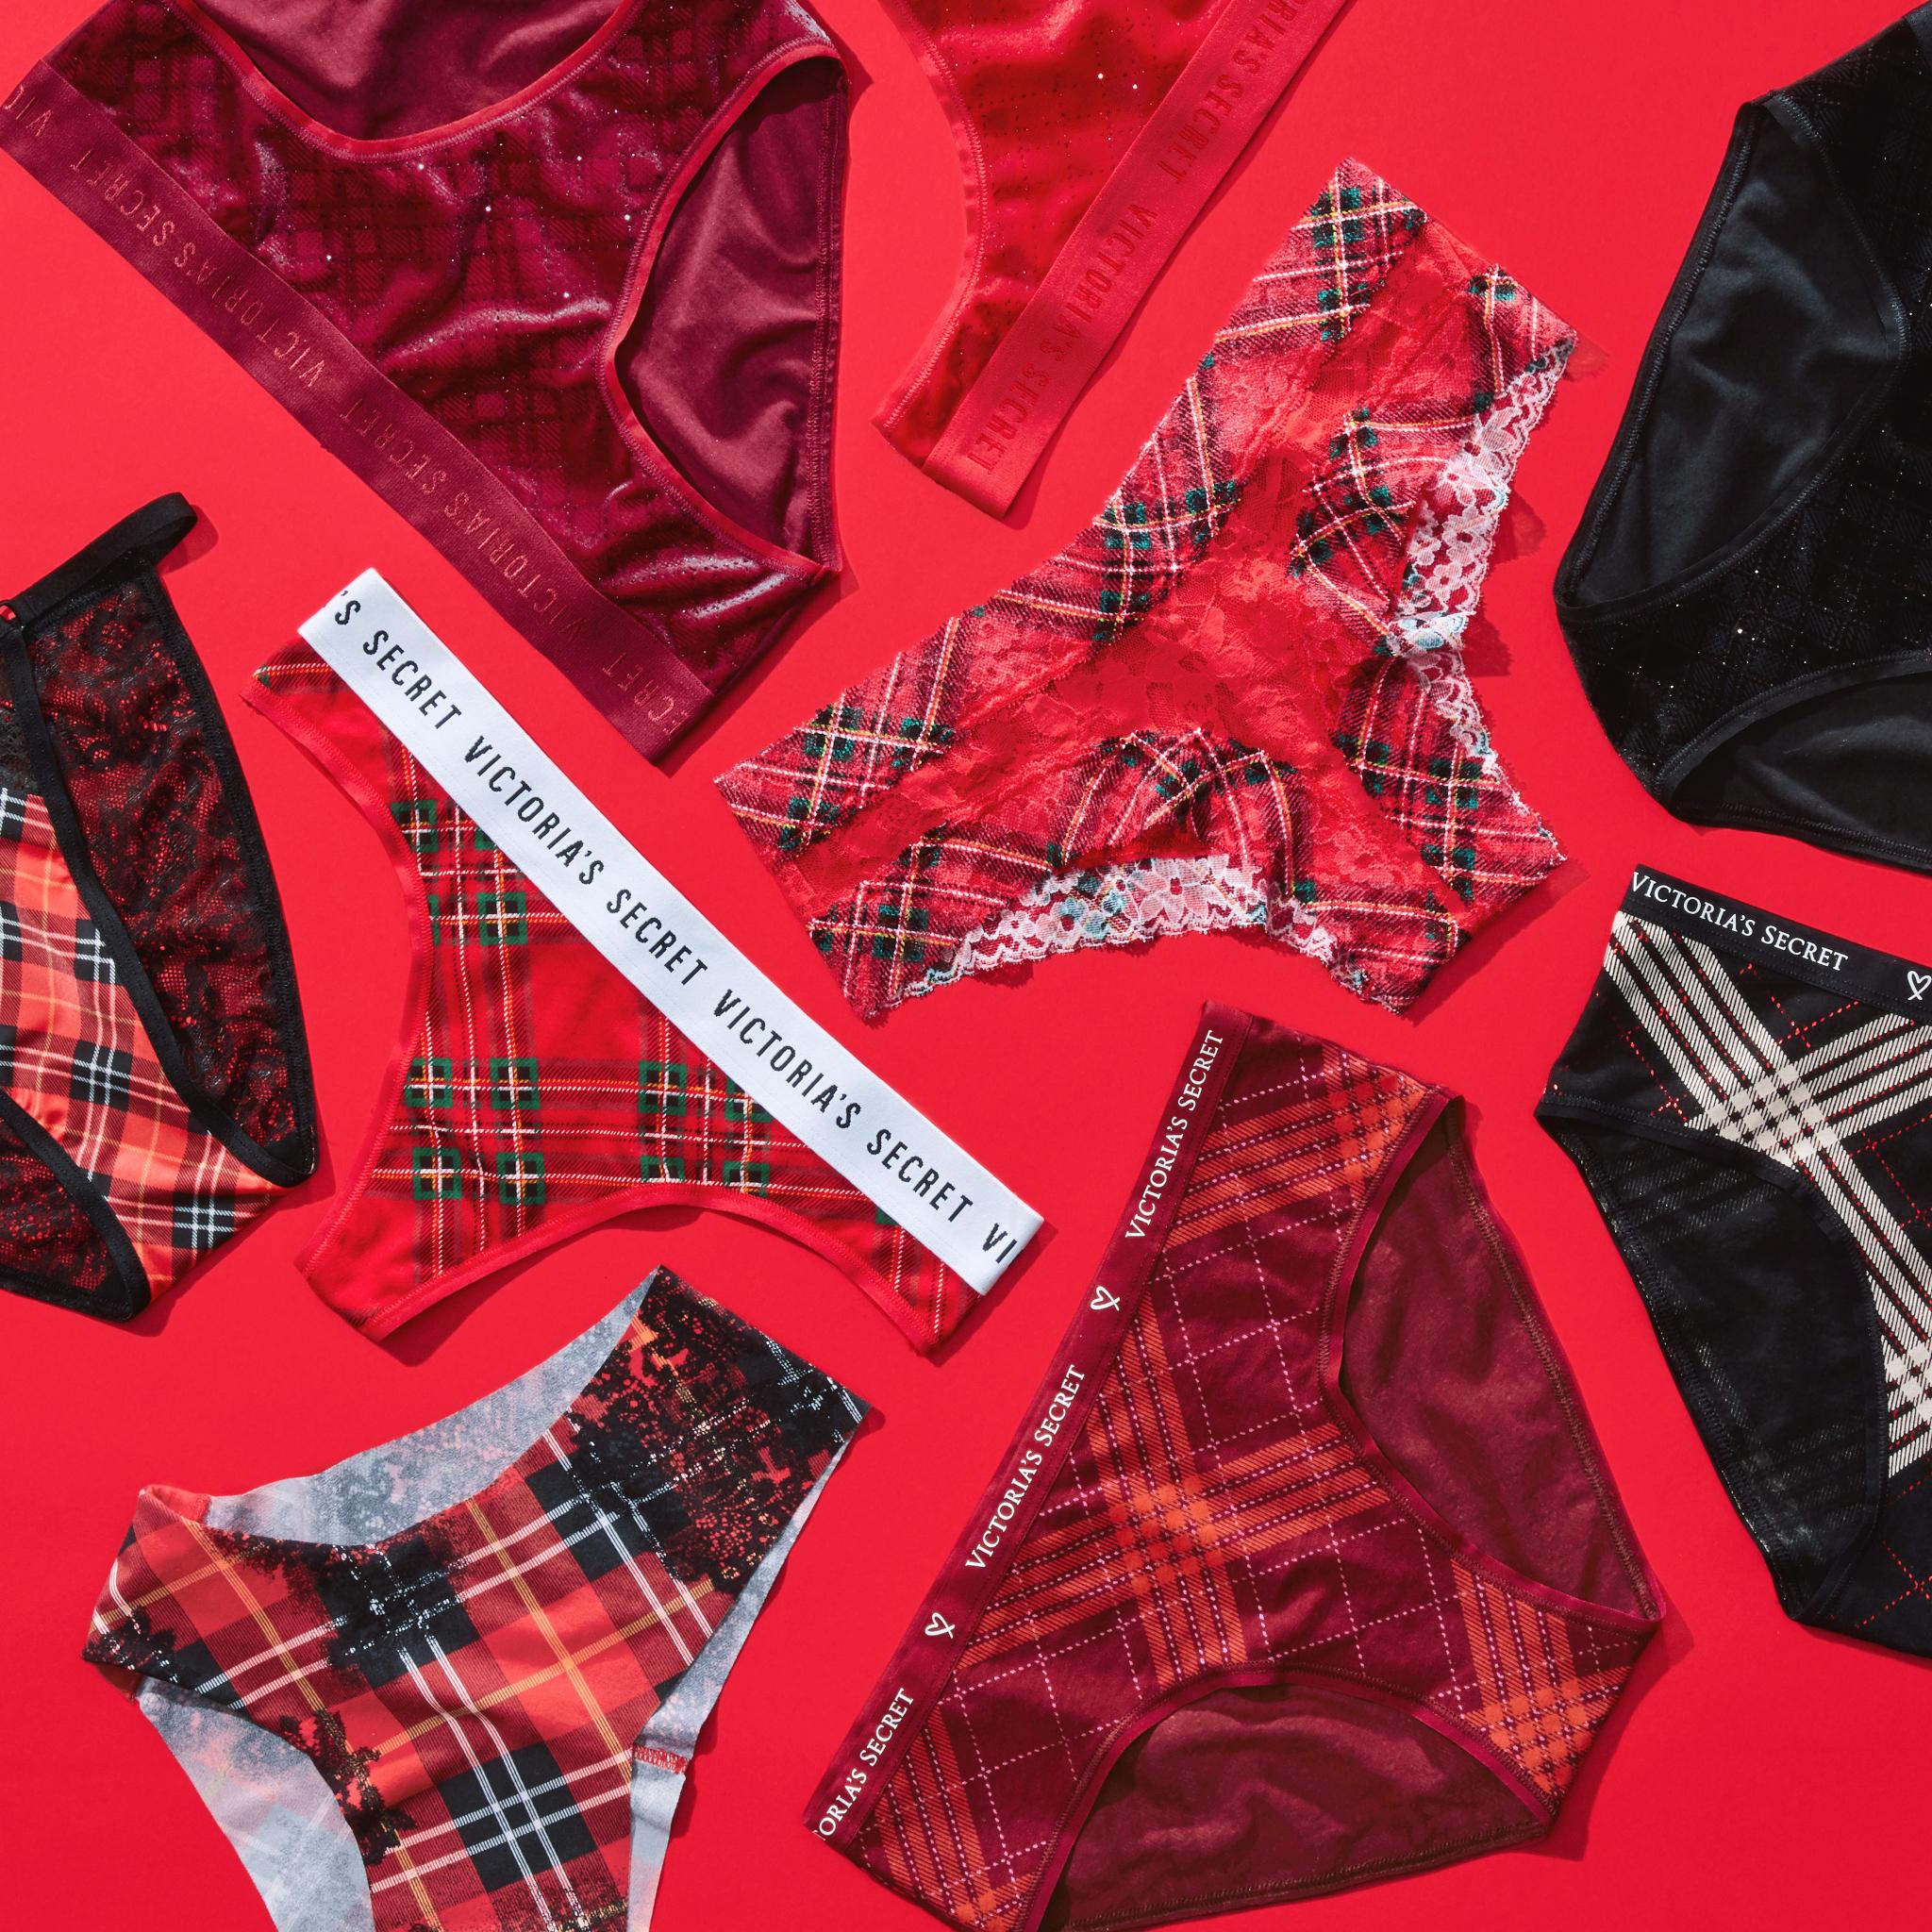 Victoria's Secret on X: How many panties will fit in a Christmas